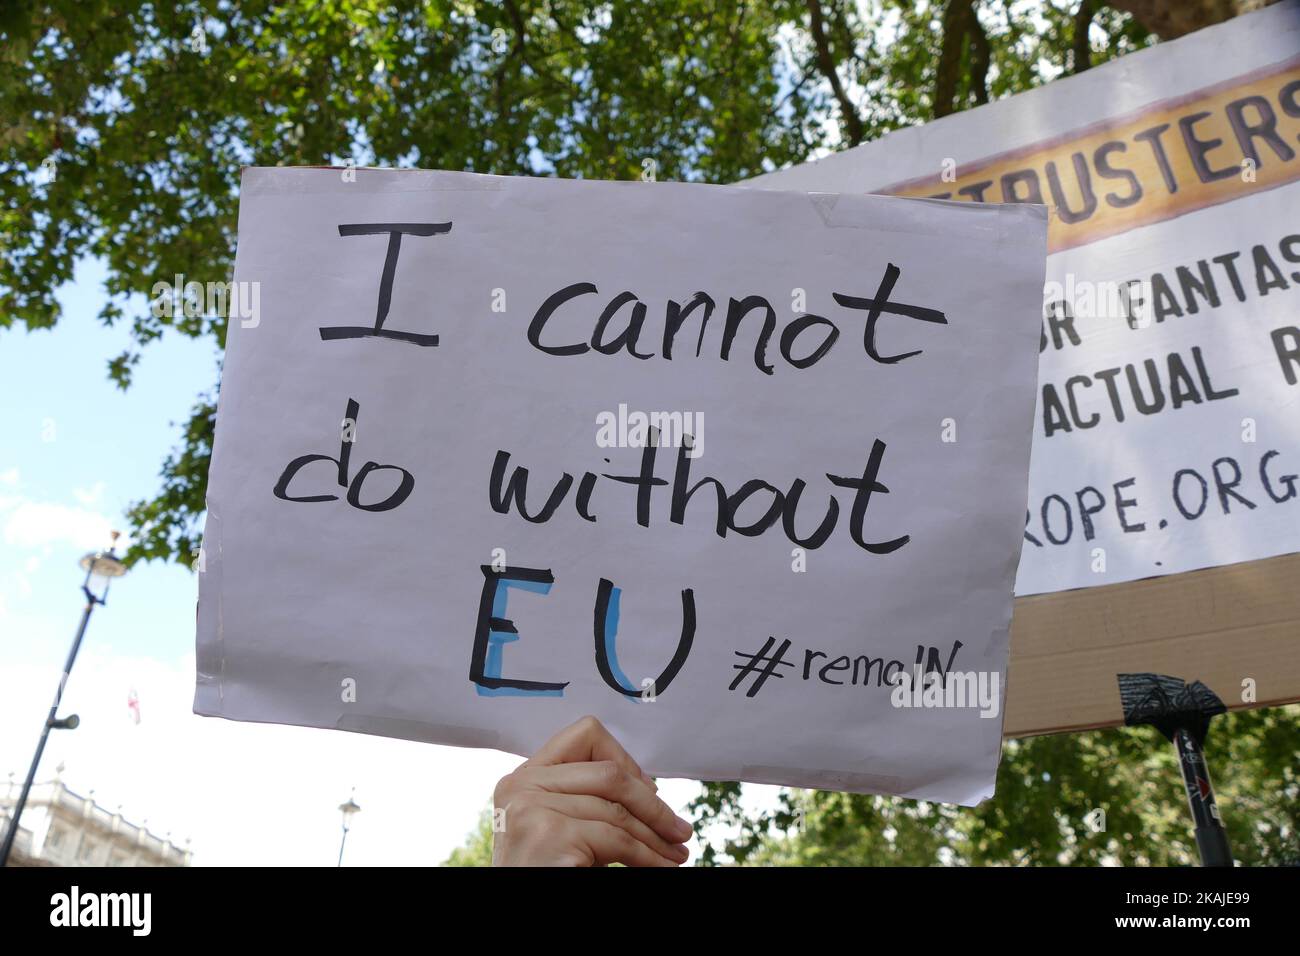 Hundreds of Pro-European campaigners marched to 10 Downing Street, London, on 23th July 2016 to show support for a stronger Europe and to remain in the EU. A referendum for Great Britain to leave the EU was held on June 23rd and passed. (Photo by Gail Orenstein/NurPhoto) *** Please Use Credit from Credit Field *** Stock Photo